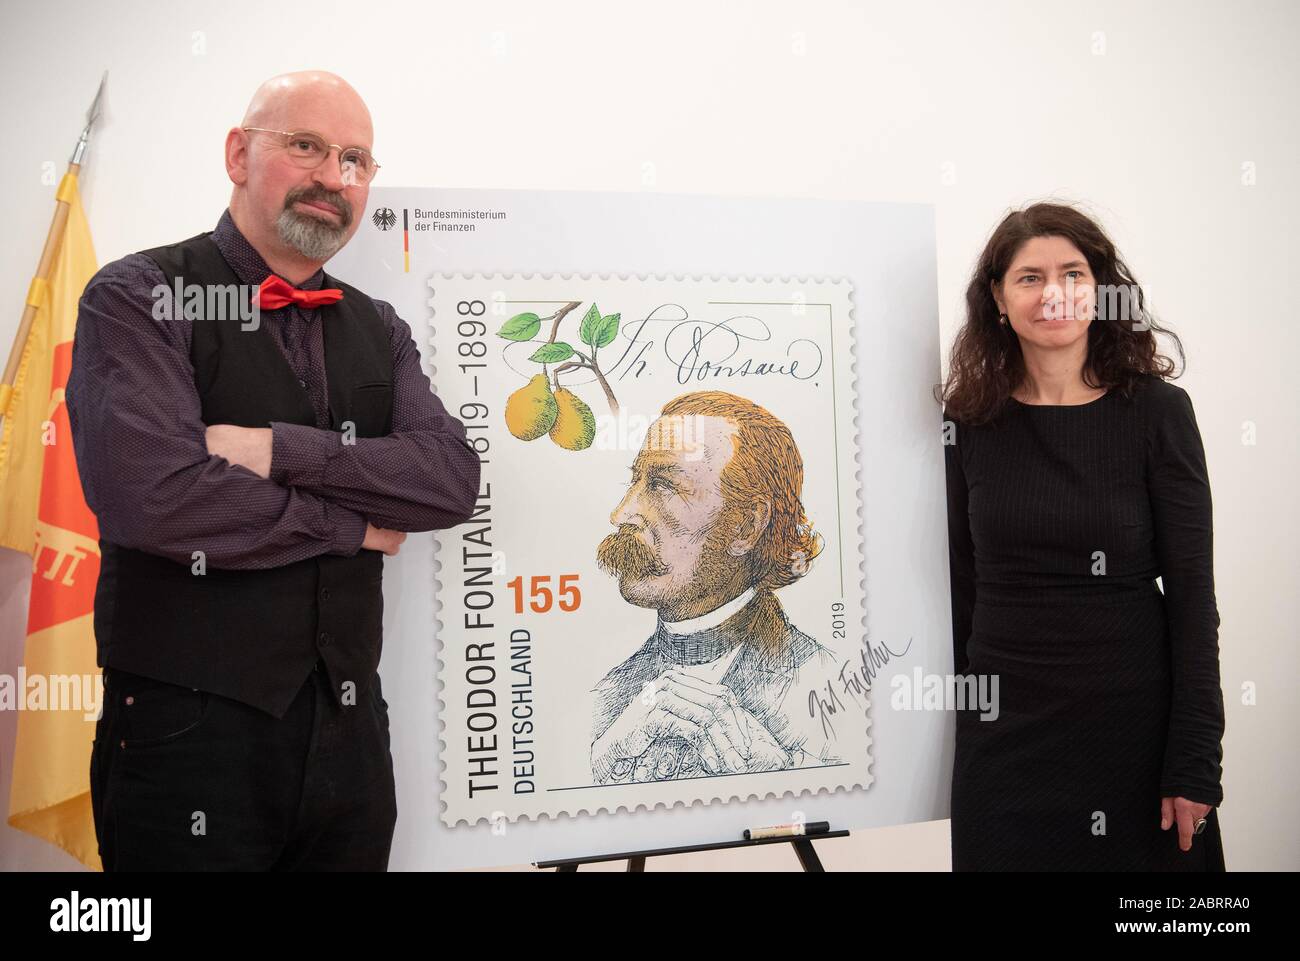 Neuruppin, Germany. 28th Nov, 2019. The Leipzig artist Grit Fiedler, designer of the stamp '200. birthday Theodor Fontane', stands next to an oversized expression after the presentation of the stamp. The portrait drawing is by the Kleinmachnoiwer graphic artist and draughtsman Rainer Ehrt (l). The stamp will be available in Deutsche Post sales outlets from 5 December 2019 and has a value of 155 cents. Credit: Soeren Stache/dpa/Alamy Live News Stock Photo